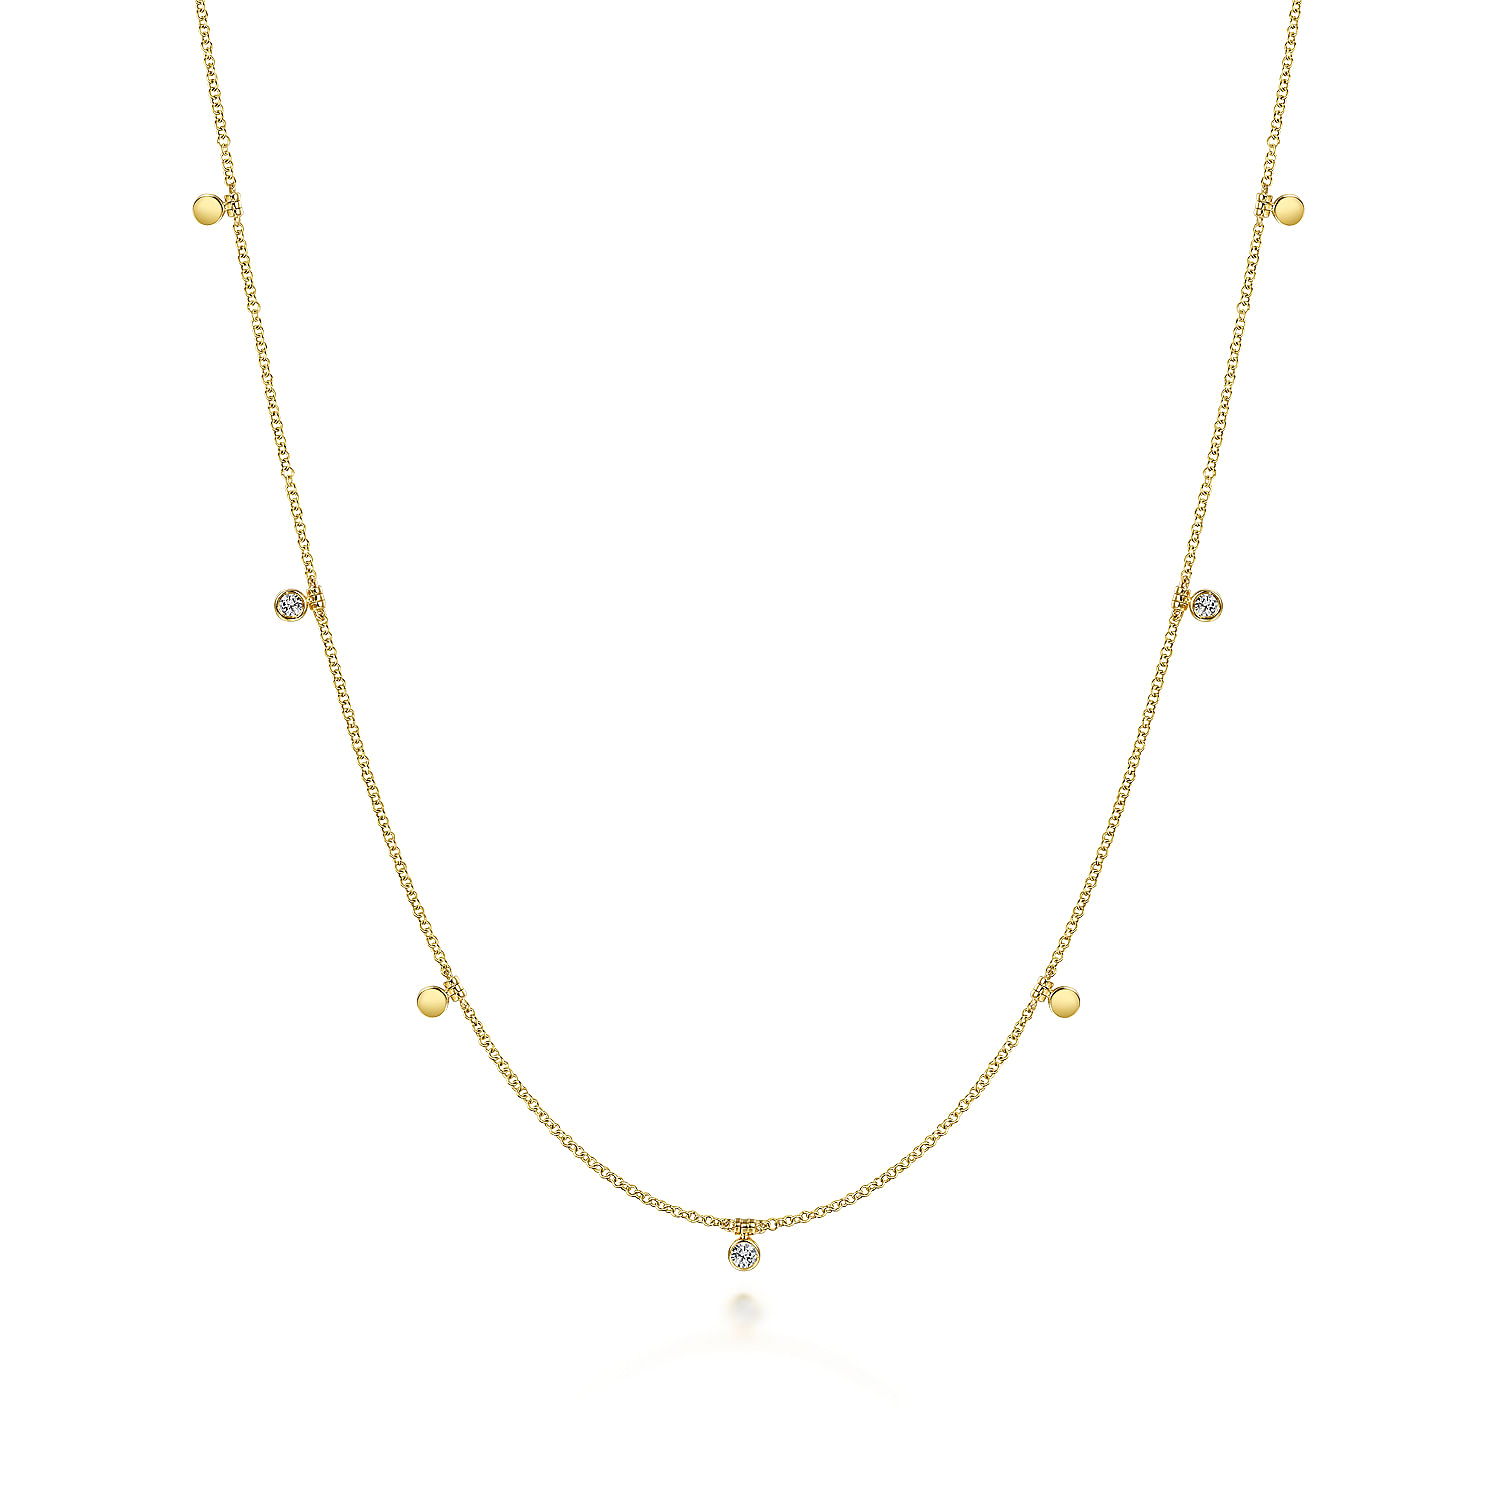 Gabriel - 24 inch 14K Yellow Gold Diamond and Disc Station Necklace